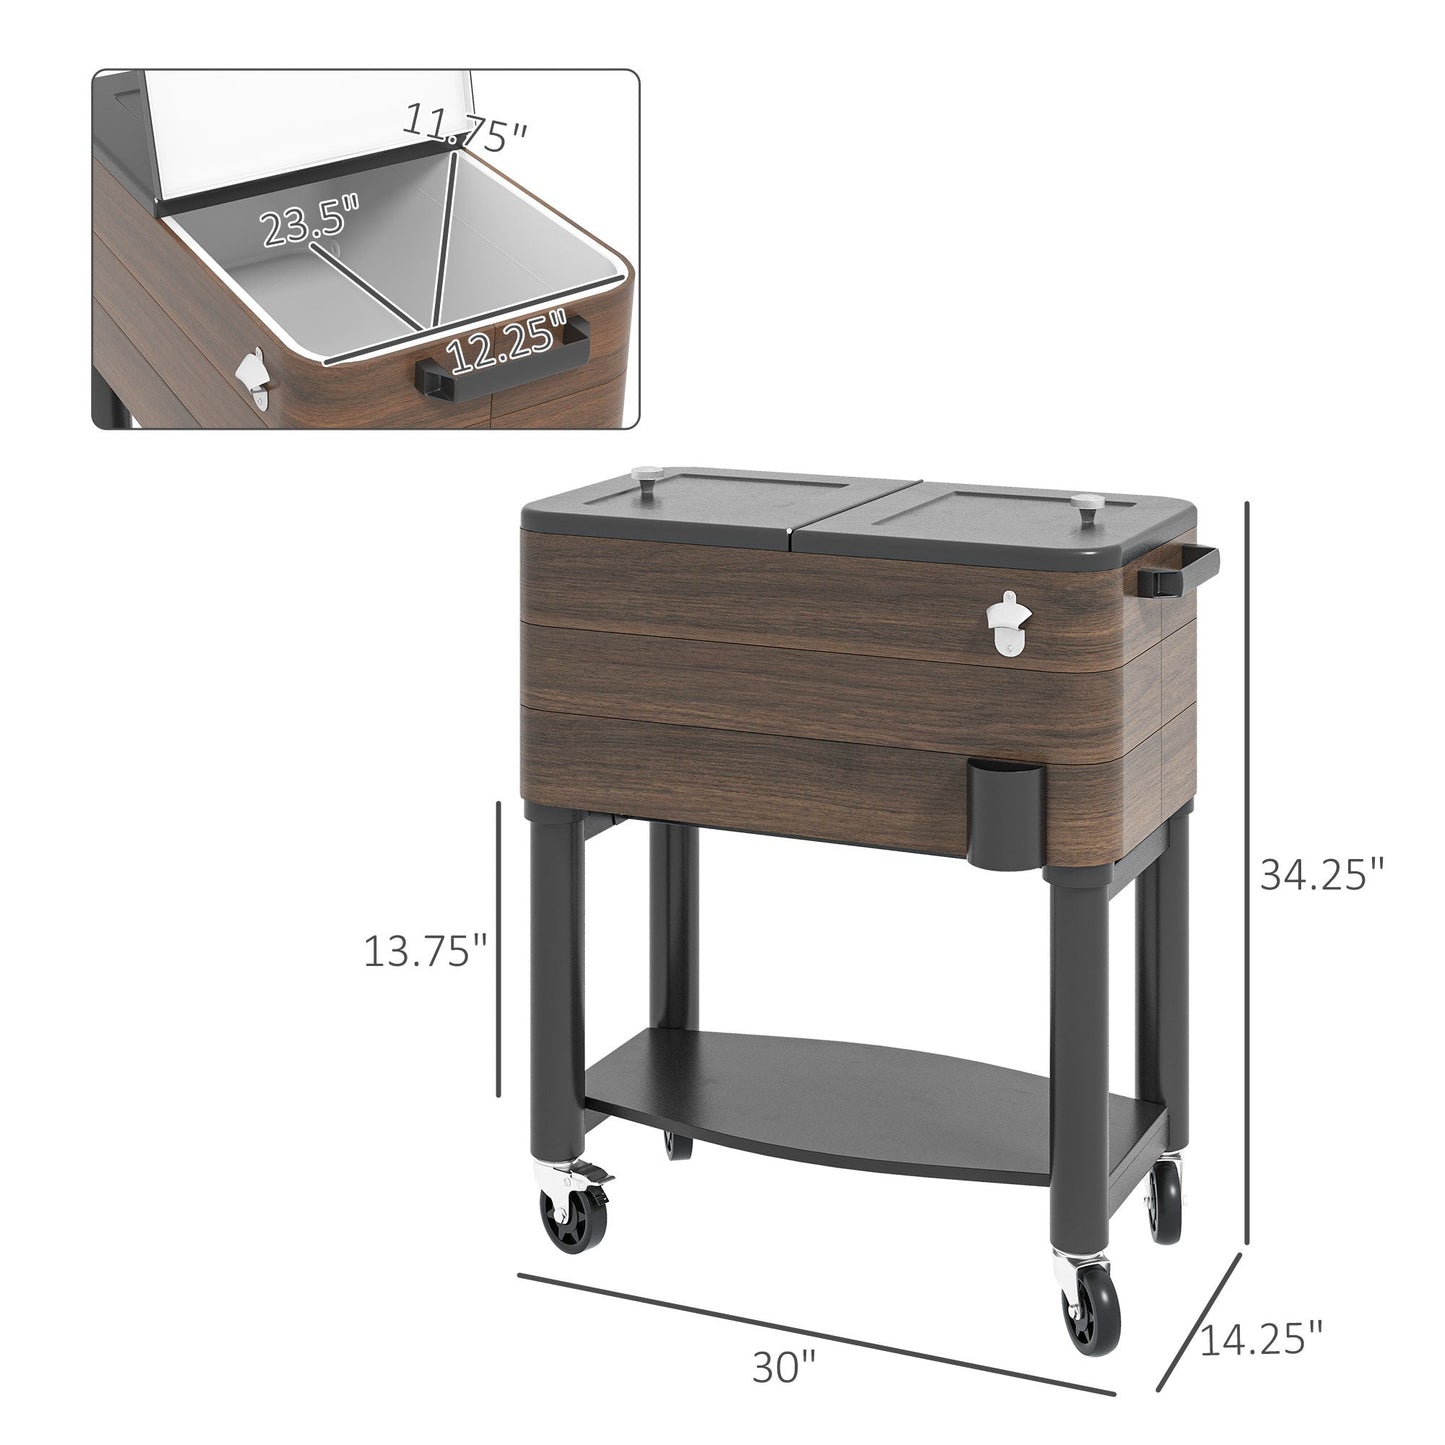 -Outsunny 60 Quart Outdoor Cooler Cart, Rolling Ice Chest with Bottom Shelf and Bottle Opener for Backyard Deck Poolside Party - Outdoor Style Company